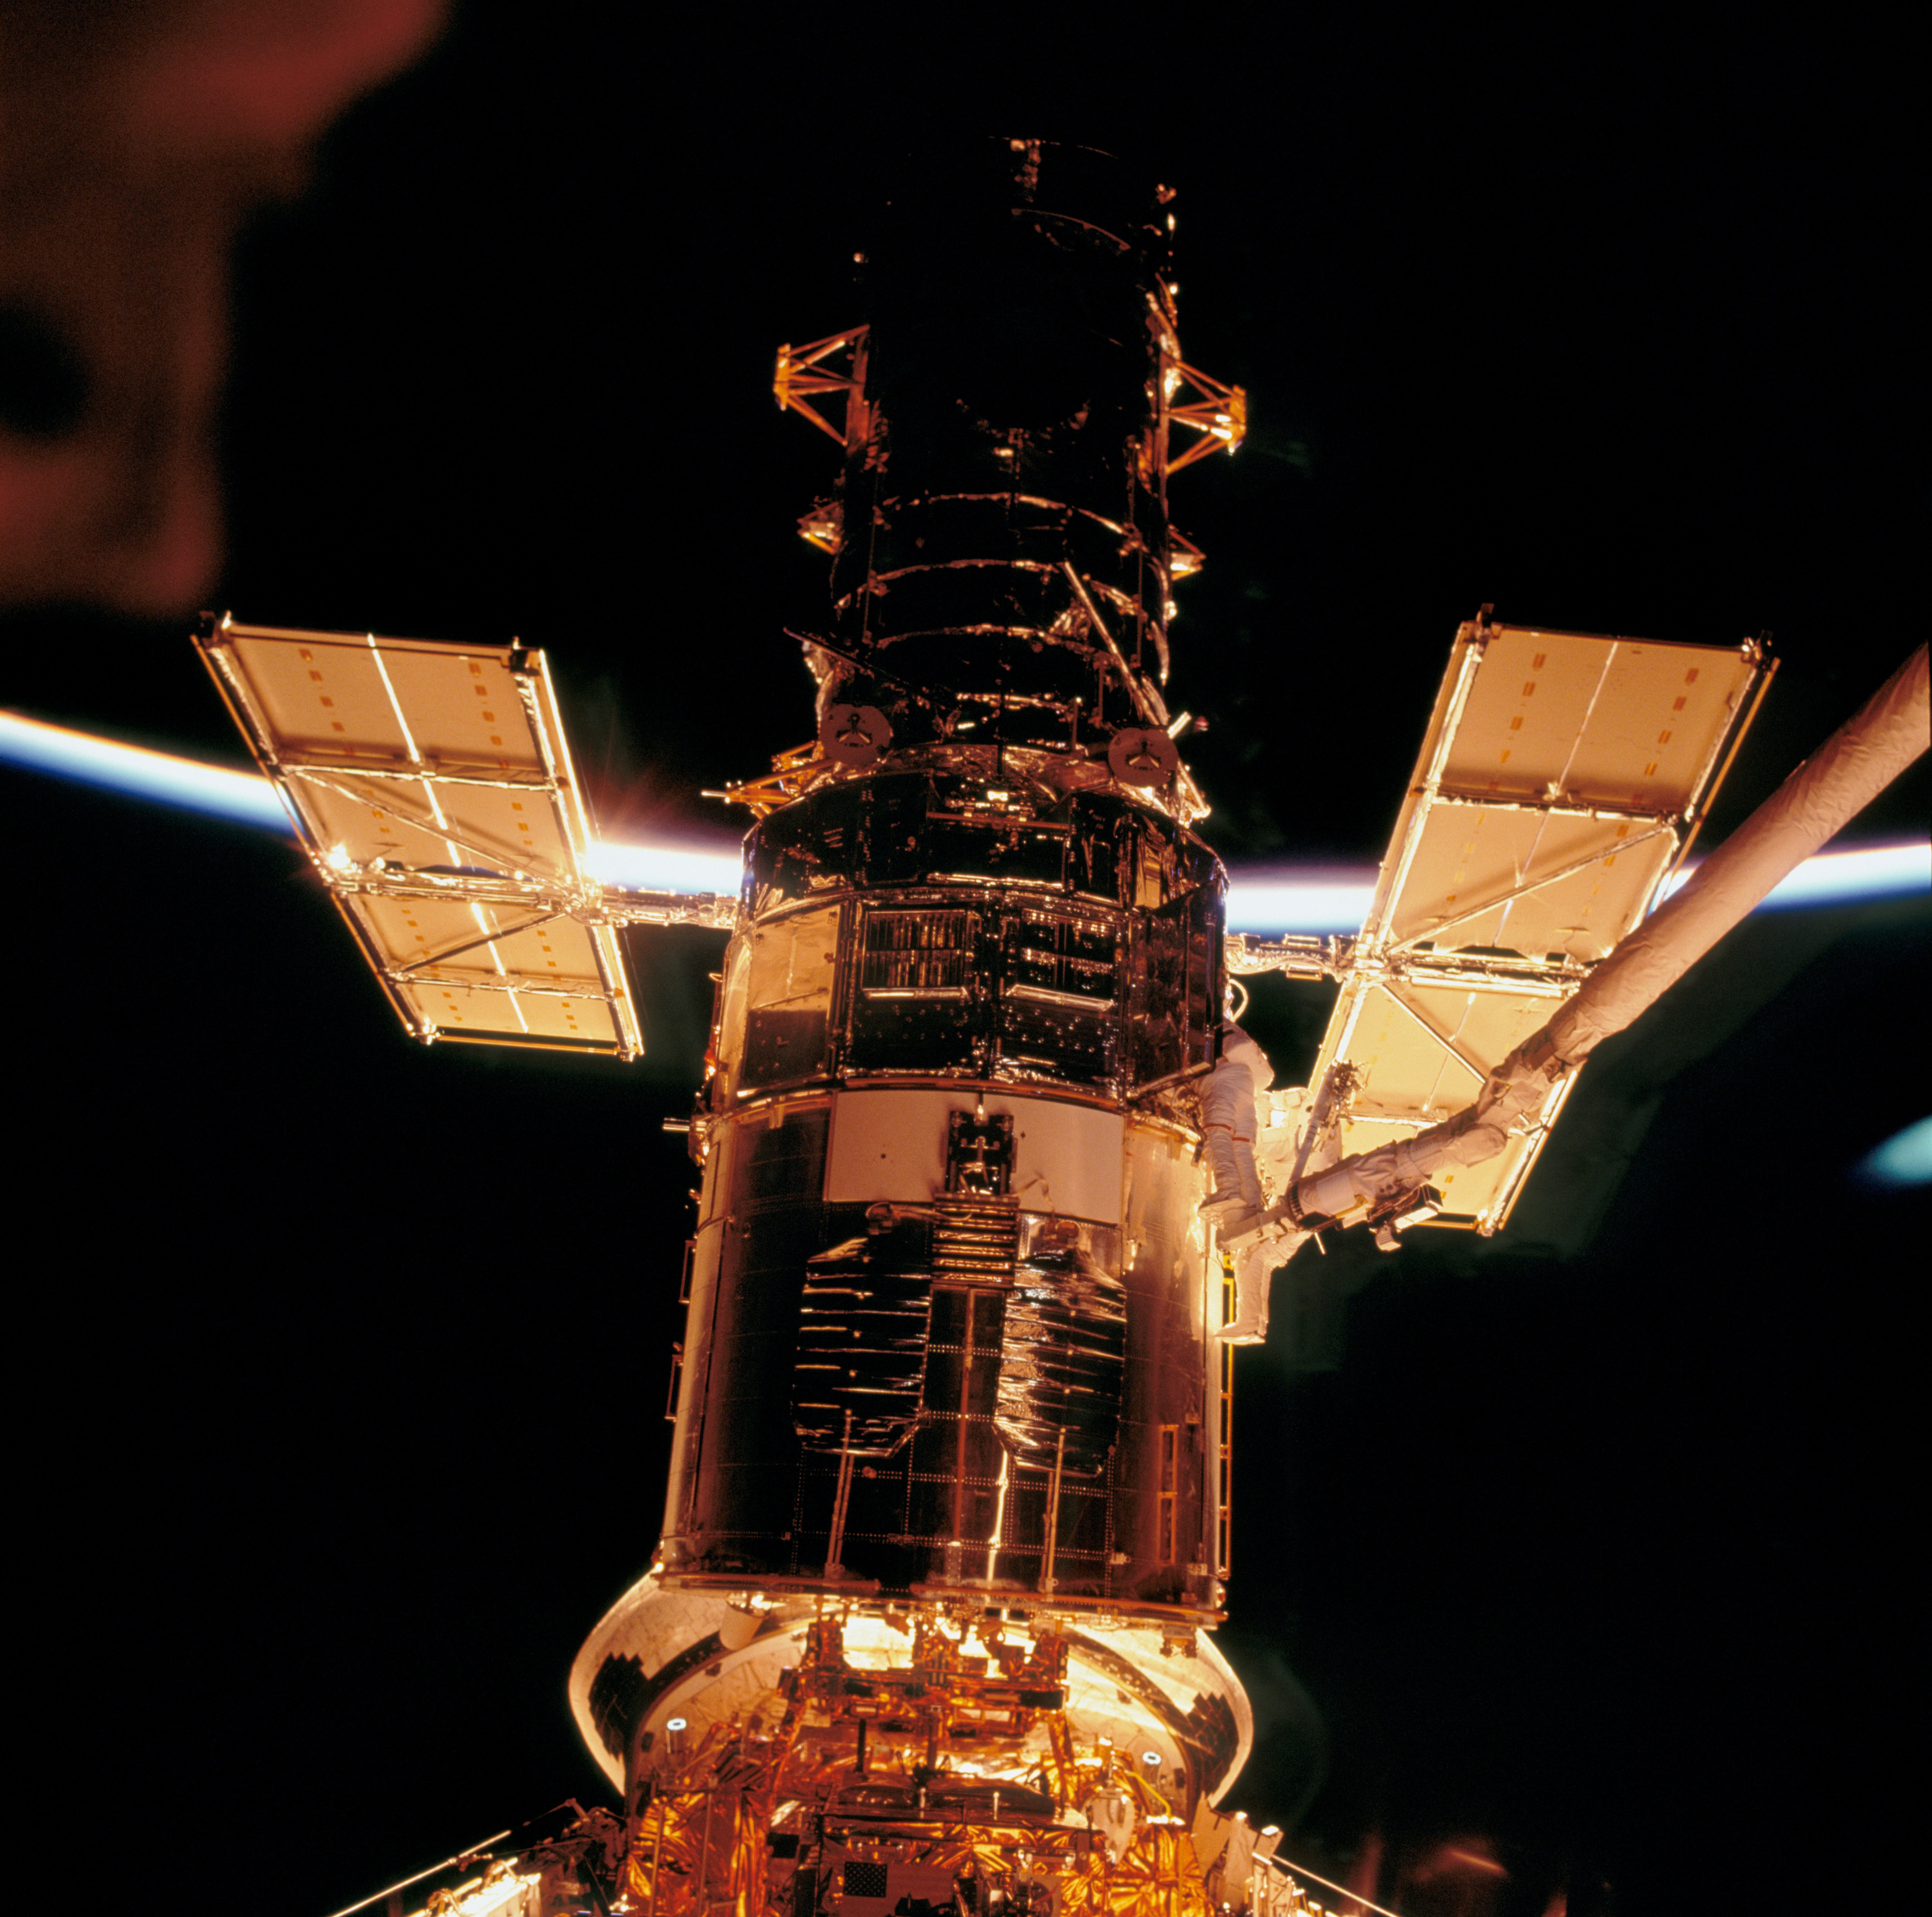 James Newman and Mike Massimino perform the first science instrument upgrade of the fourth Hubble Space Telescope servicing mission during the flight’s fourth EVA. Hubble, illuminated by the sunrise, provides stark contrast to the blackness of space in this photo. Arching between the telescope and one of the solar panels is the thin line of Earth’s atmosphere. Credit: NASA